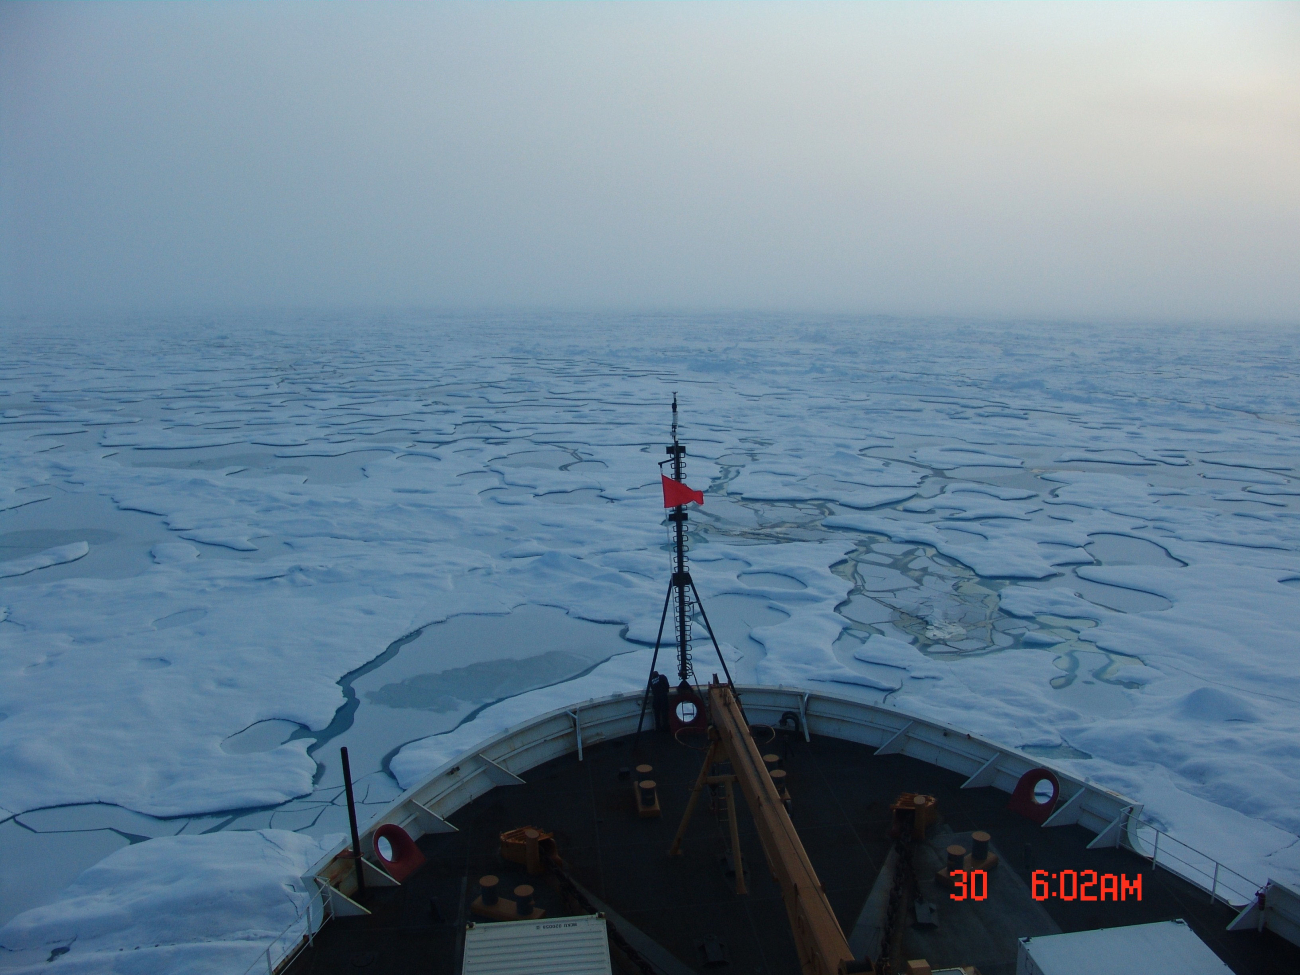 Looking over the bow of the USCGC HEALY towards an extensive area of multi-year ice with refreezing melt ponds